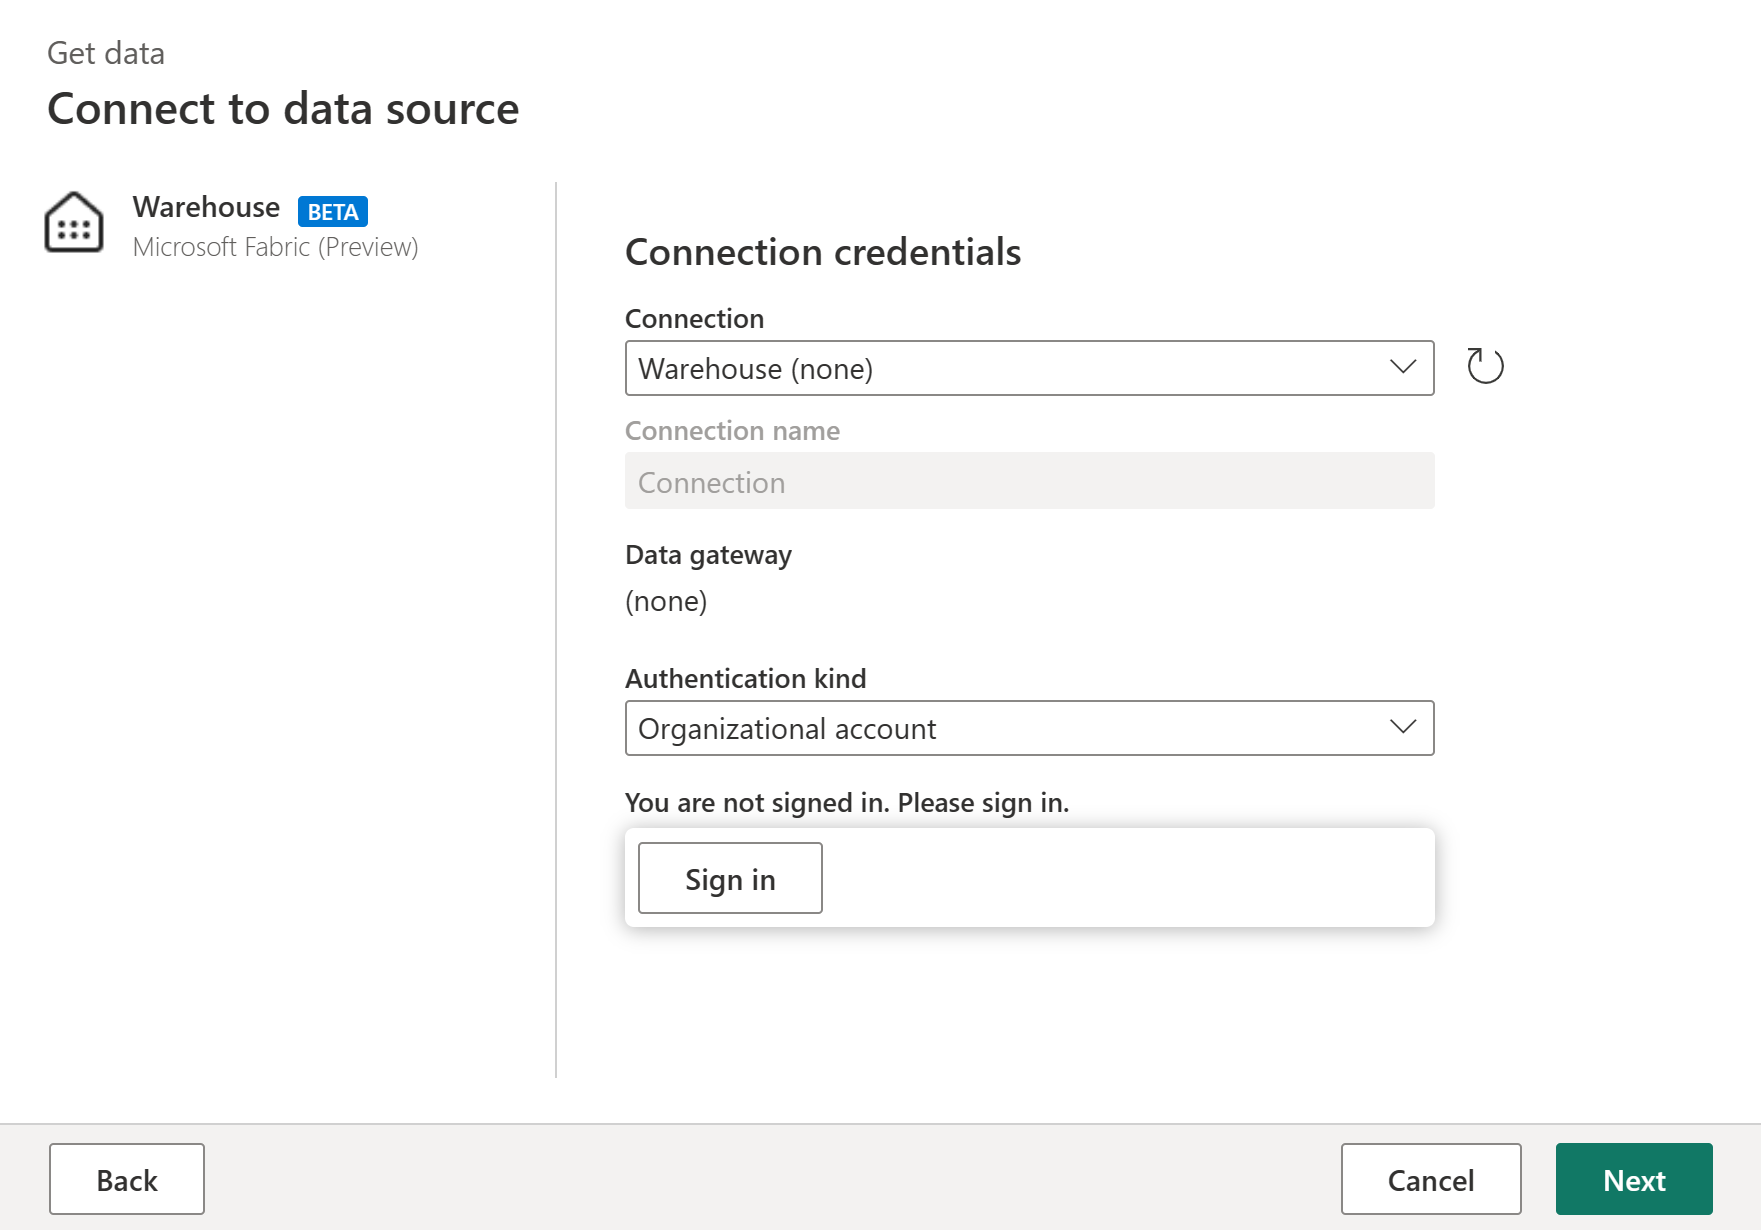 Screenshot of the connect to data source screen.